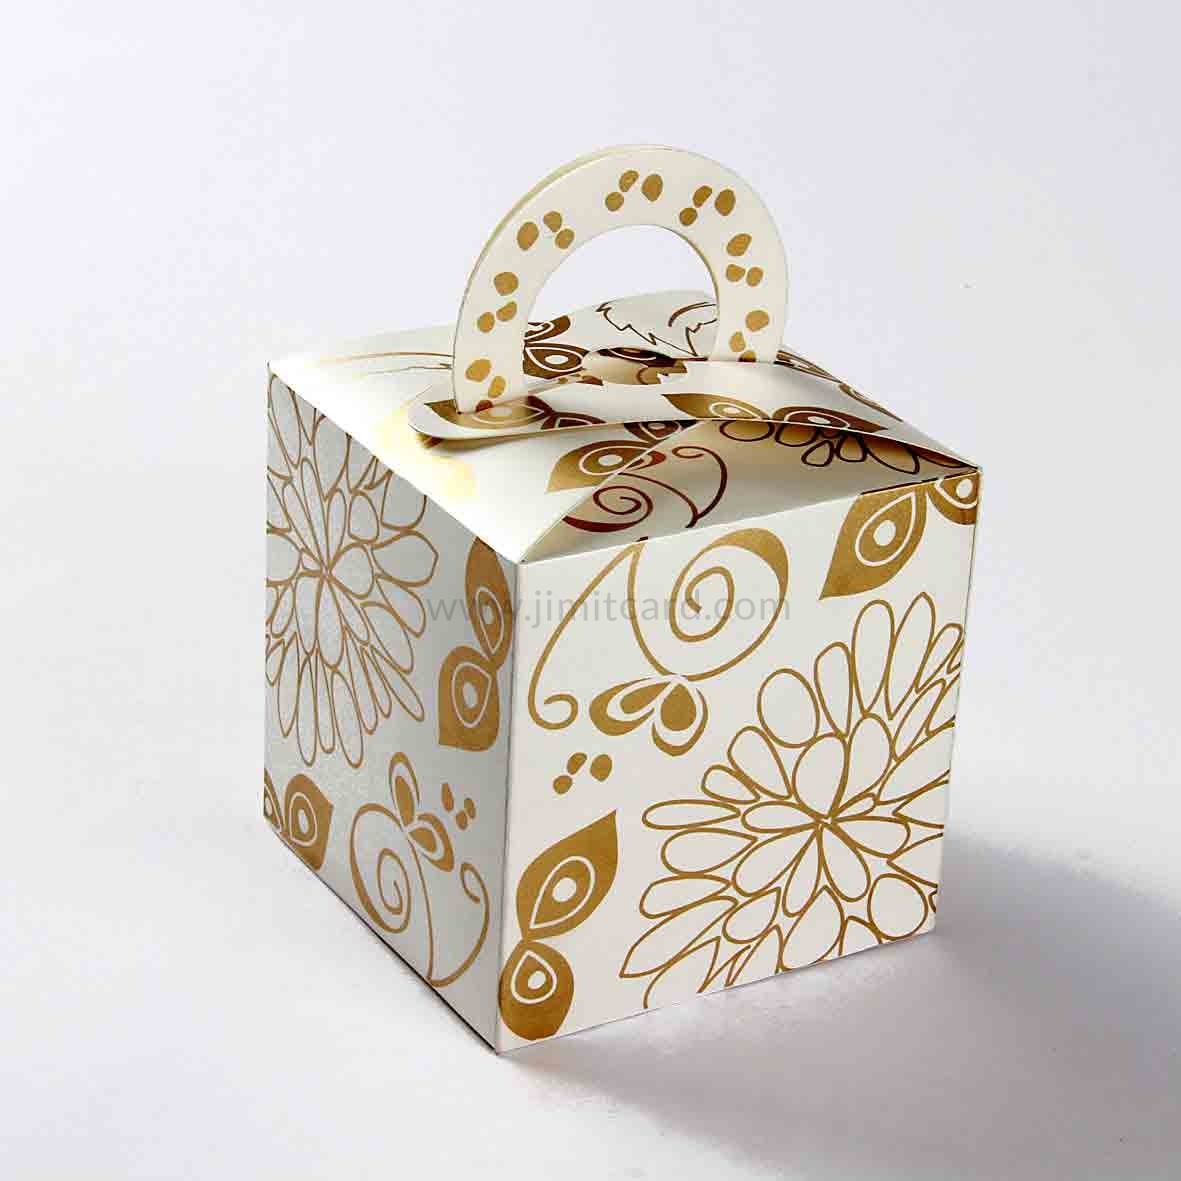 Square Wedding Party Favor Box in White Color with a Holder